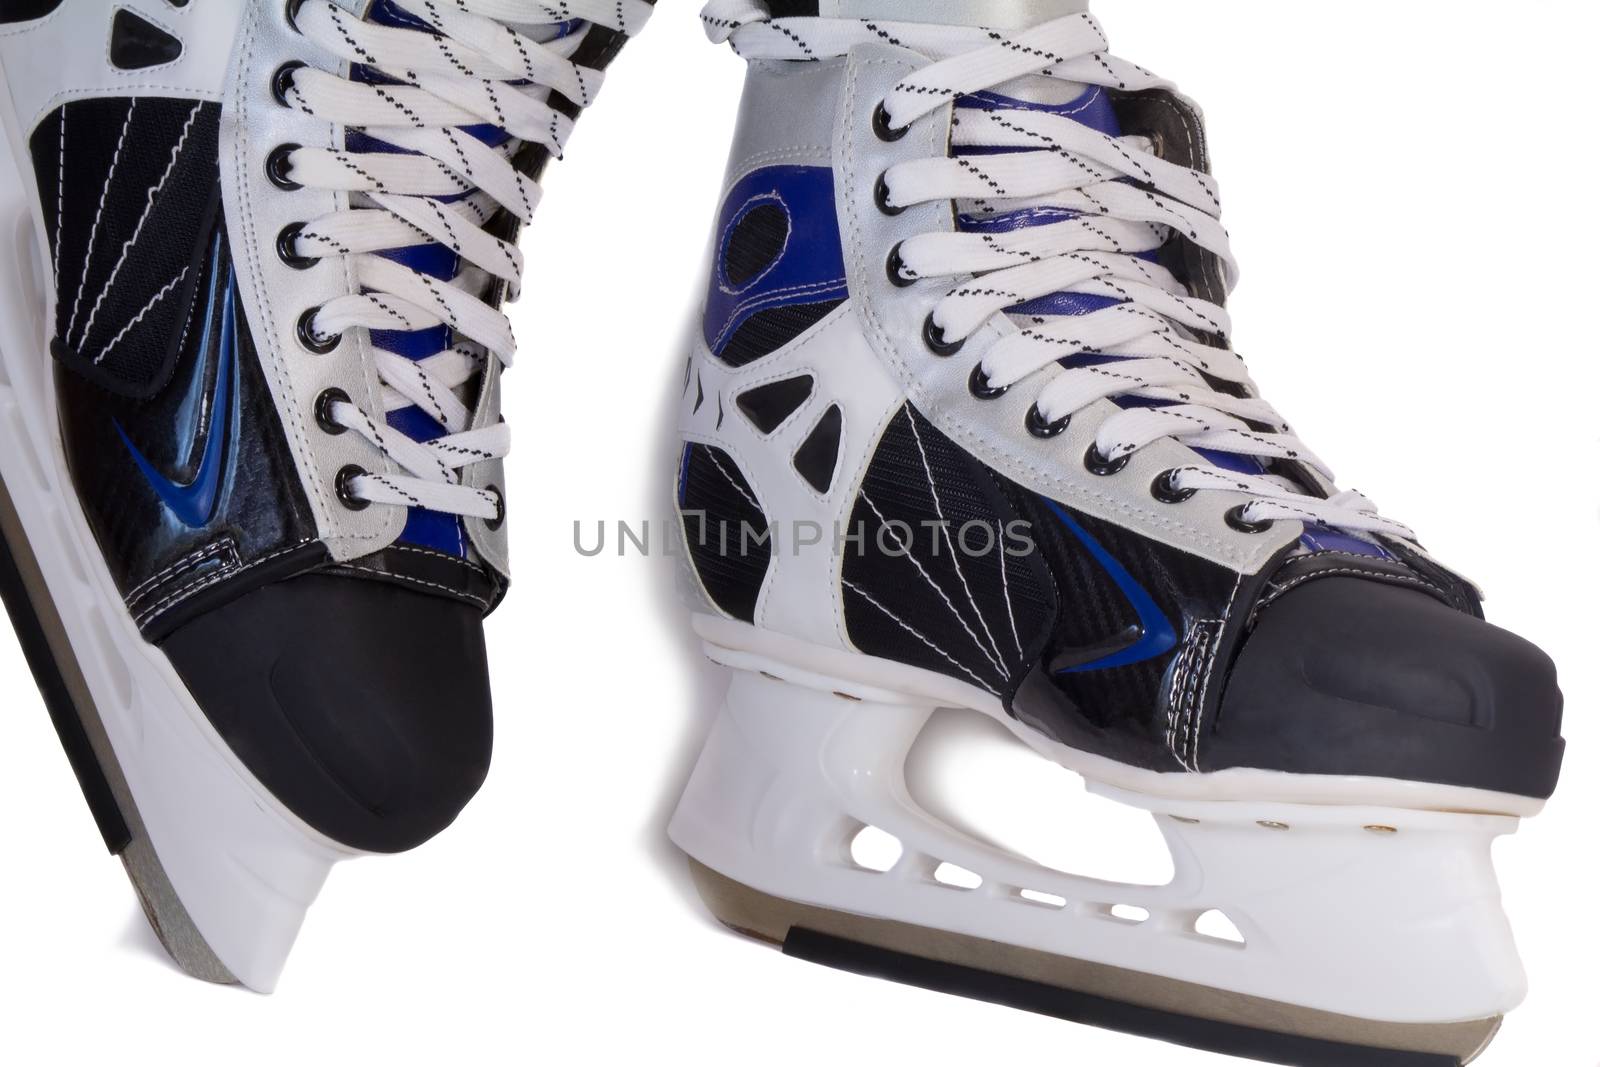 Comfortable and beautiful men's skating boots. Presented on a white background.
